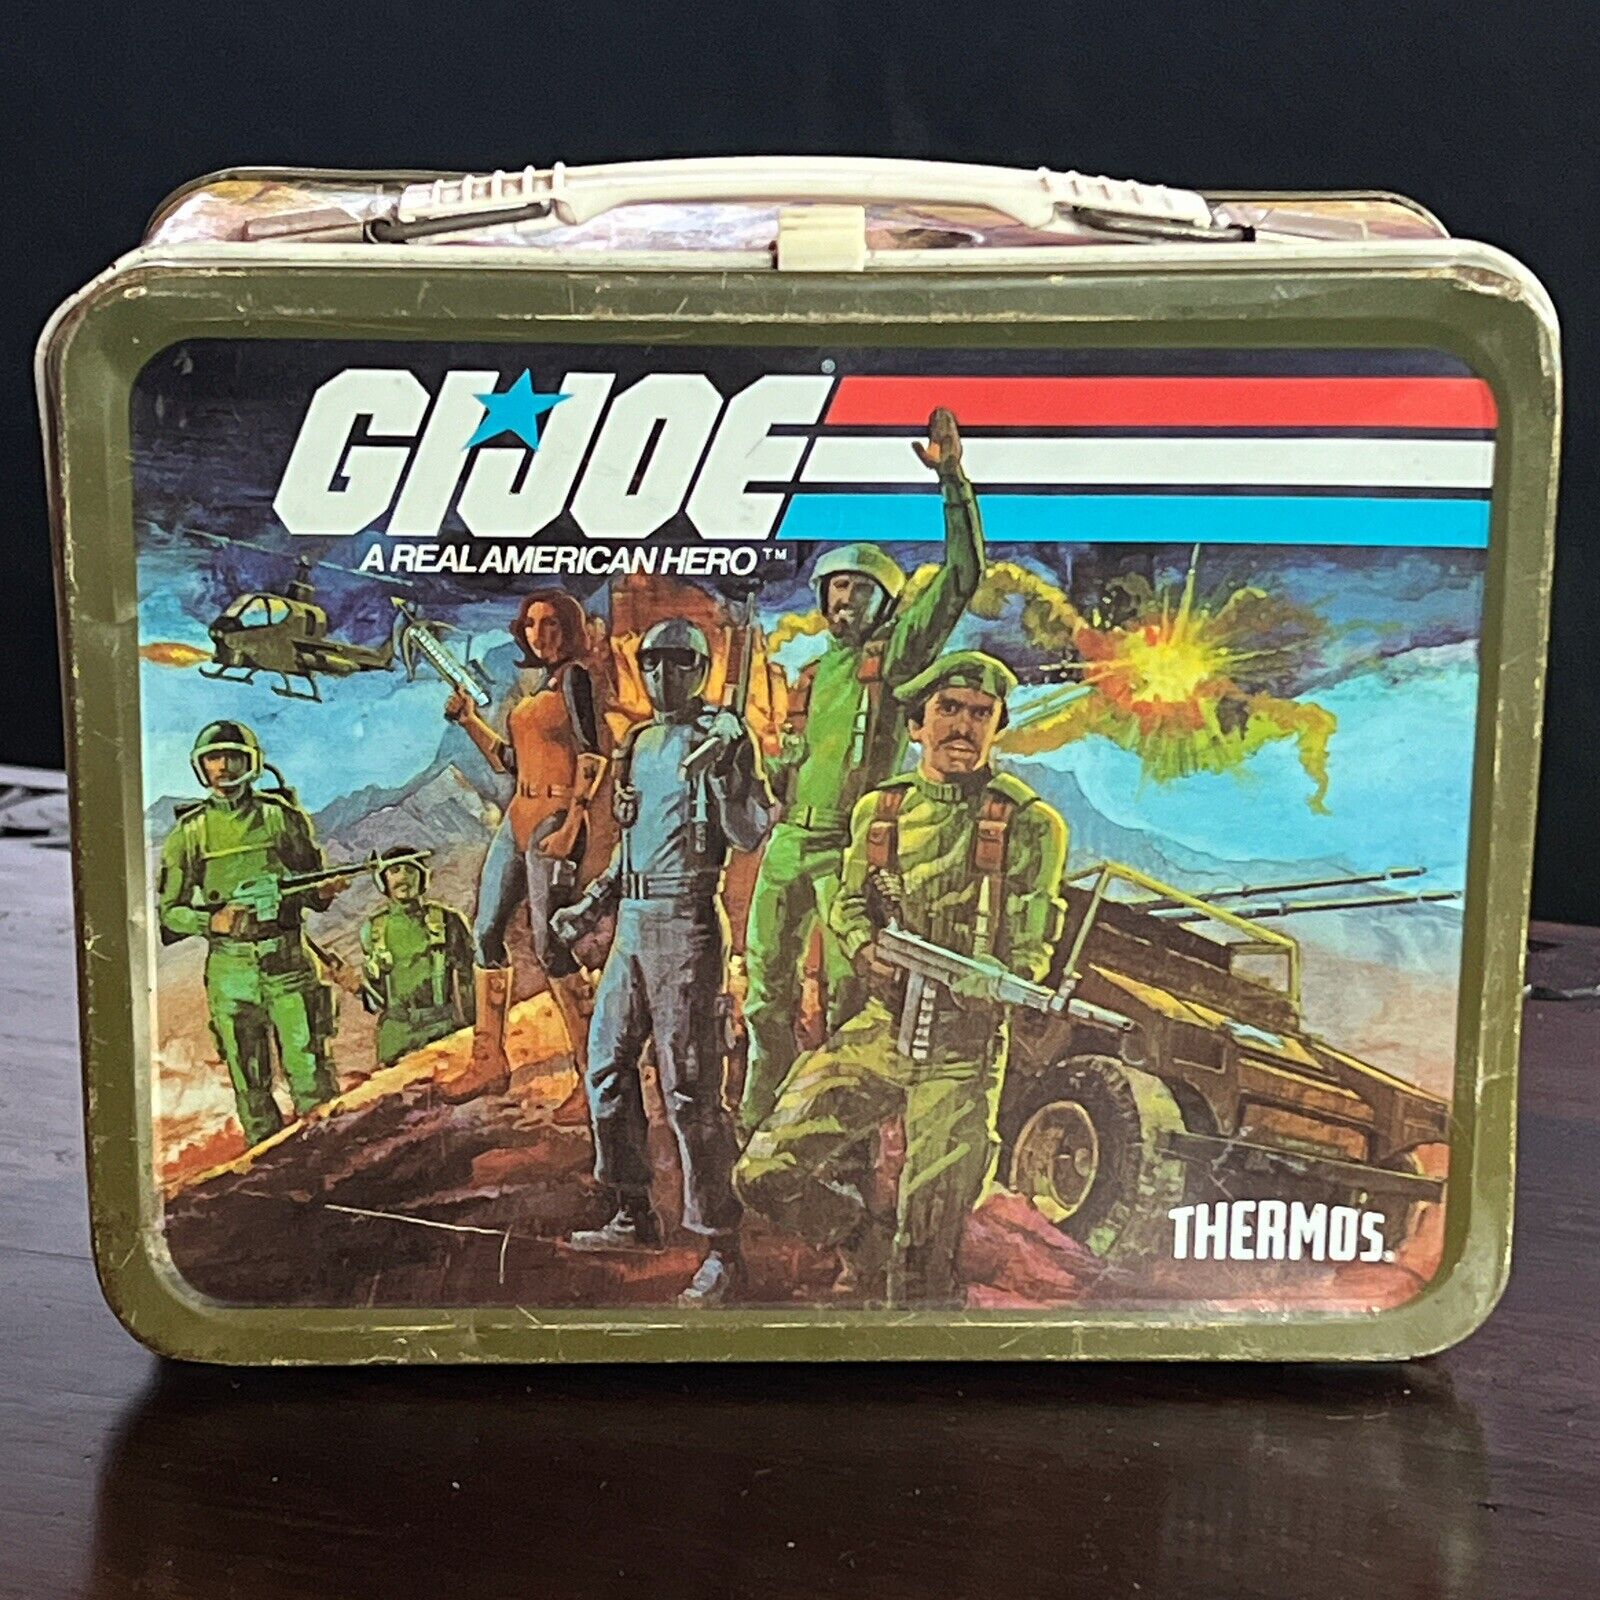 Vintage G.I. Joe: A Real American Hero Metal Lunch Box 1982 No Thermos Seeley